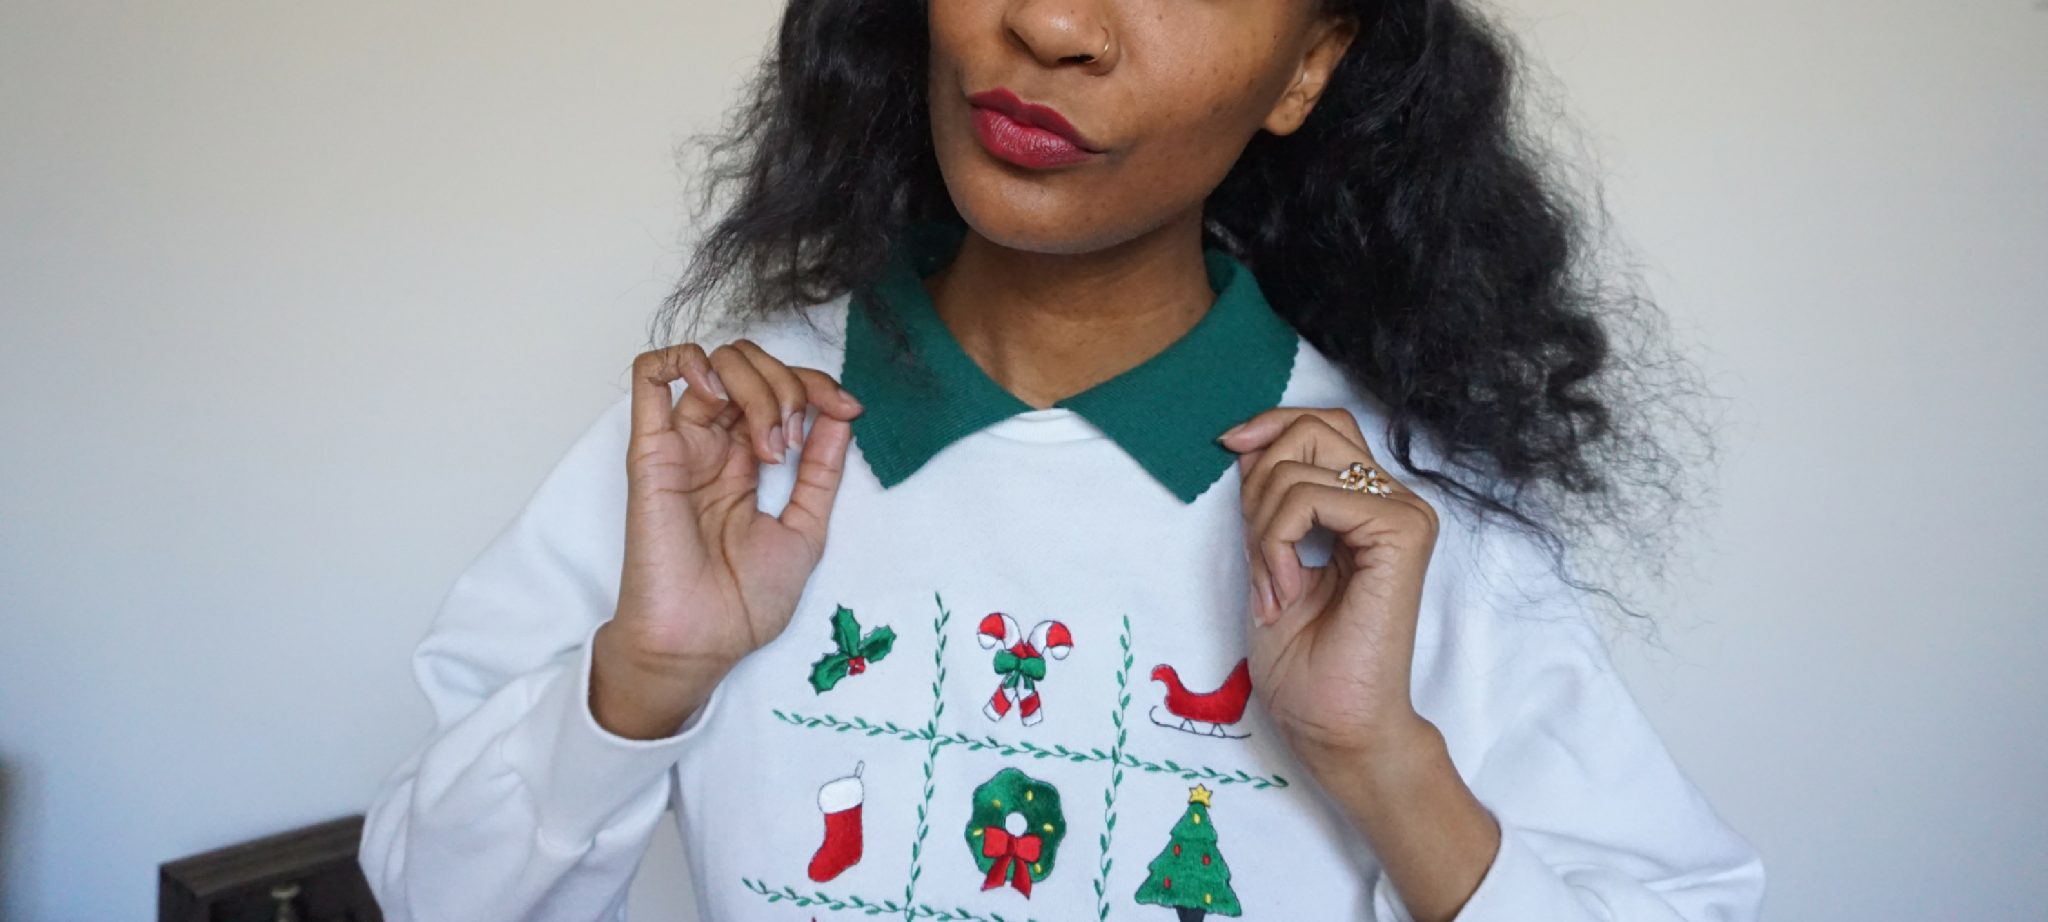 Thrifted Christmas Attire – Quirky Christmas Sweater